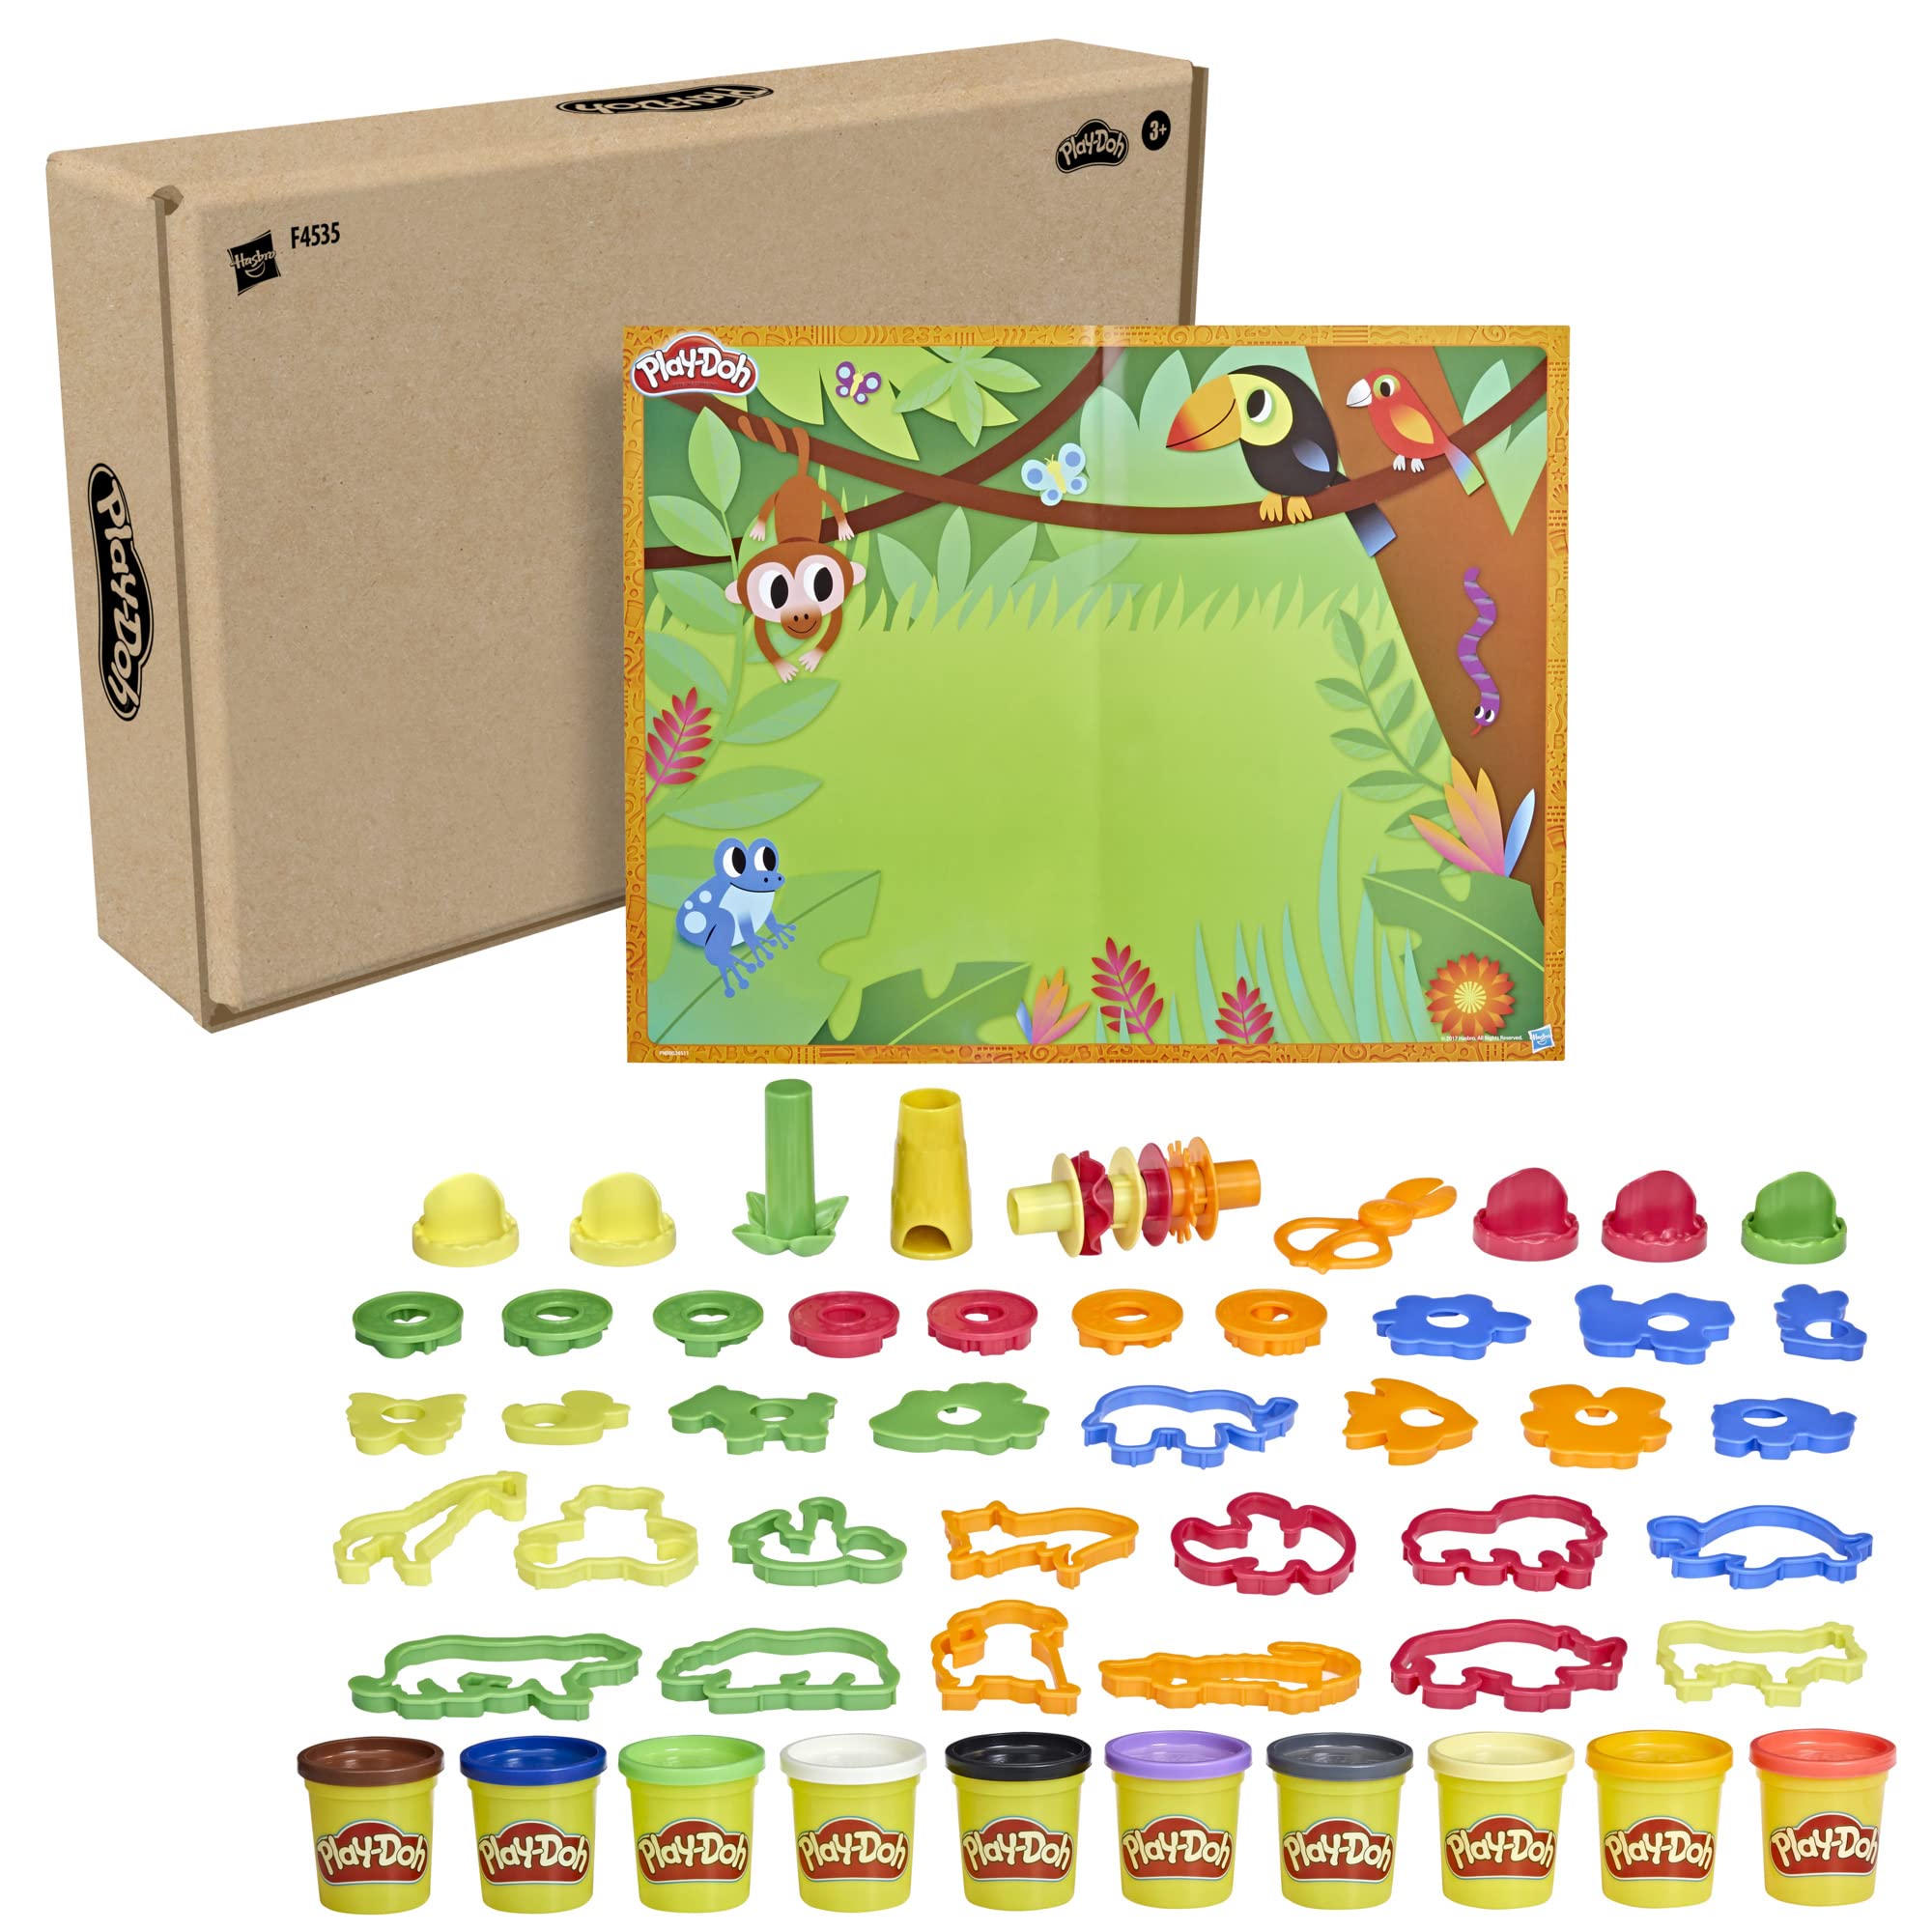 Play-Doh Animal Adventure Set, Arts and Crafts Toys for 3 Year Old Girls & Boys, 45 Tools, 10 Cans (Amazon Exclusive)